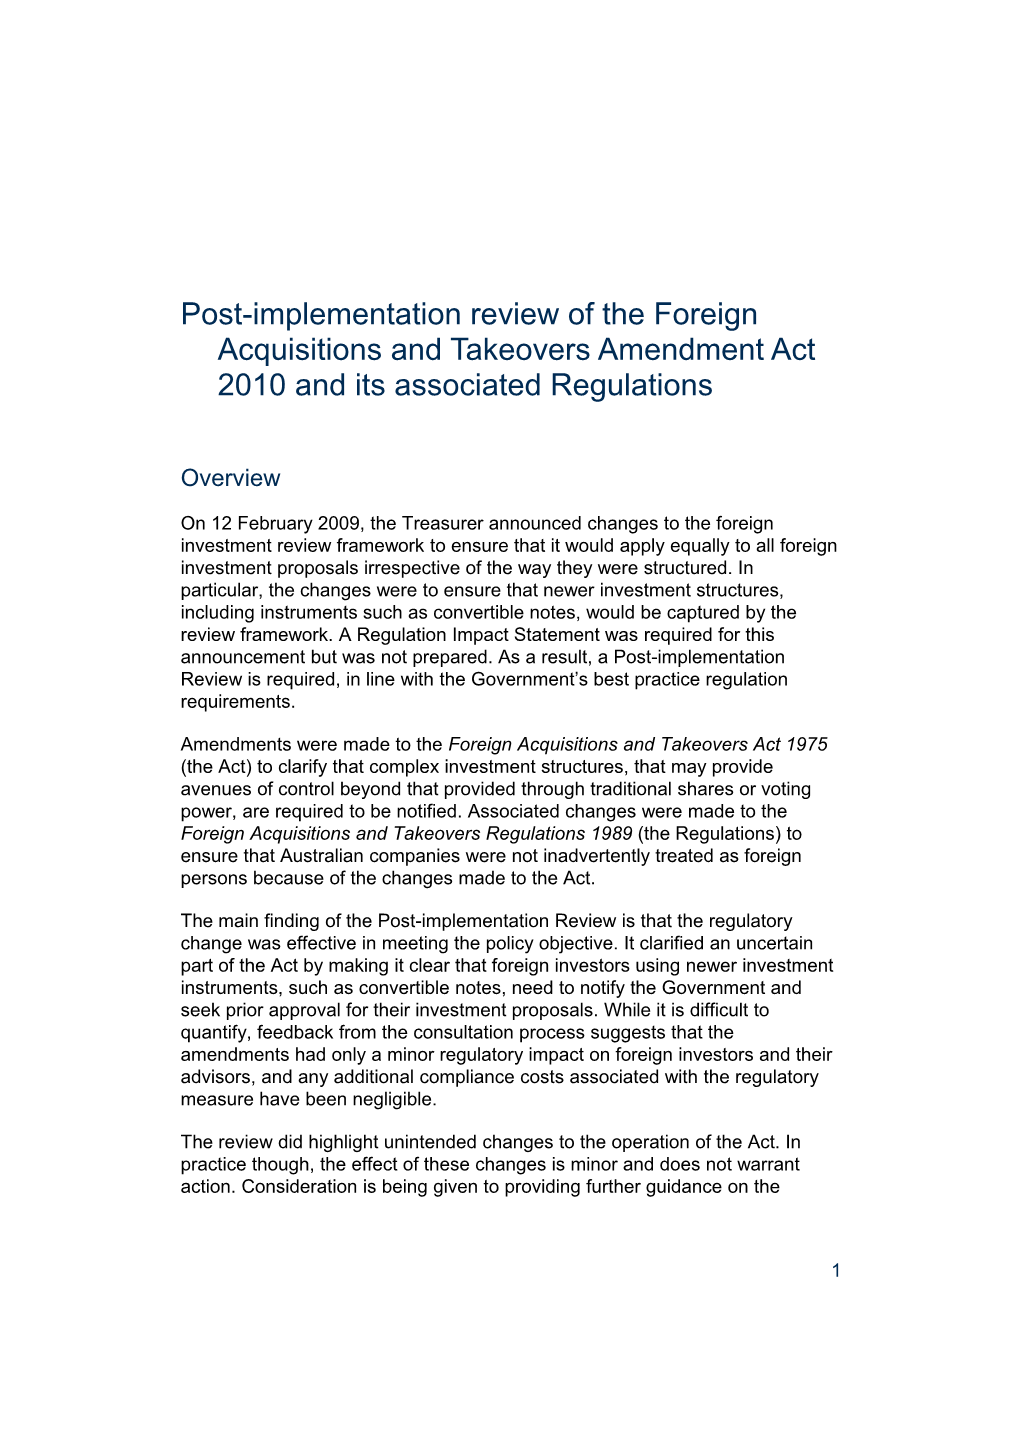 Post-Implementation Review of the Foreign Acquisitions and Takeovers Amendment Act 2012